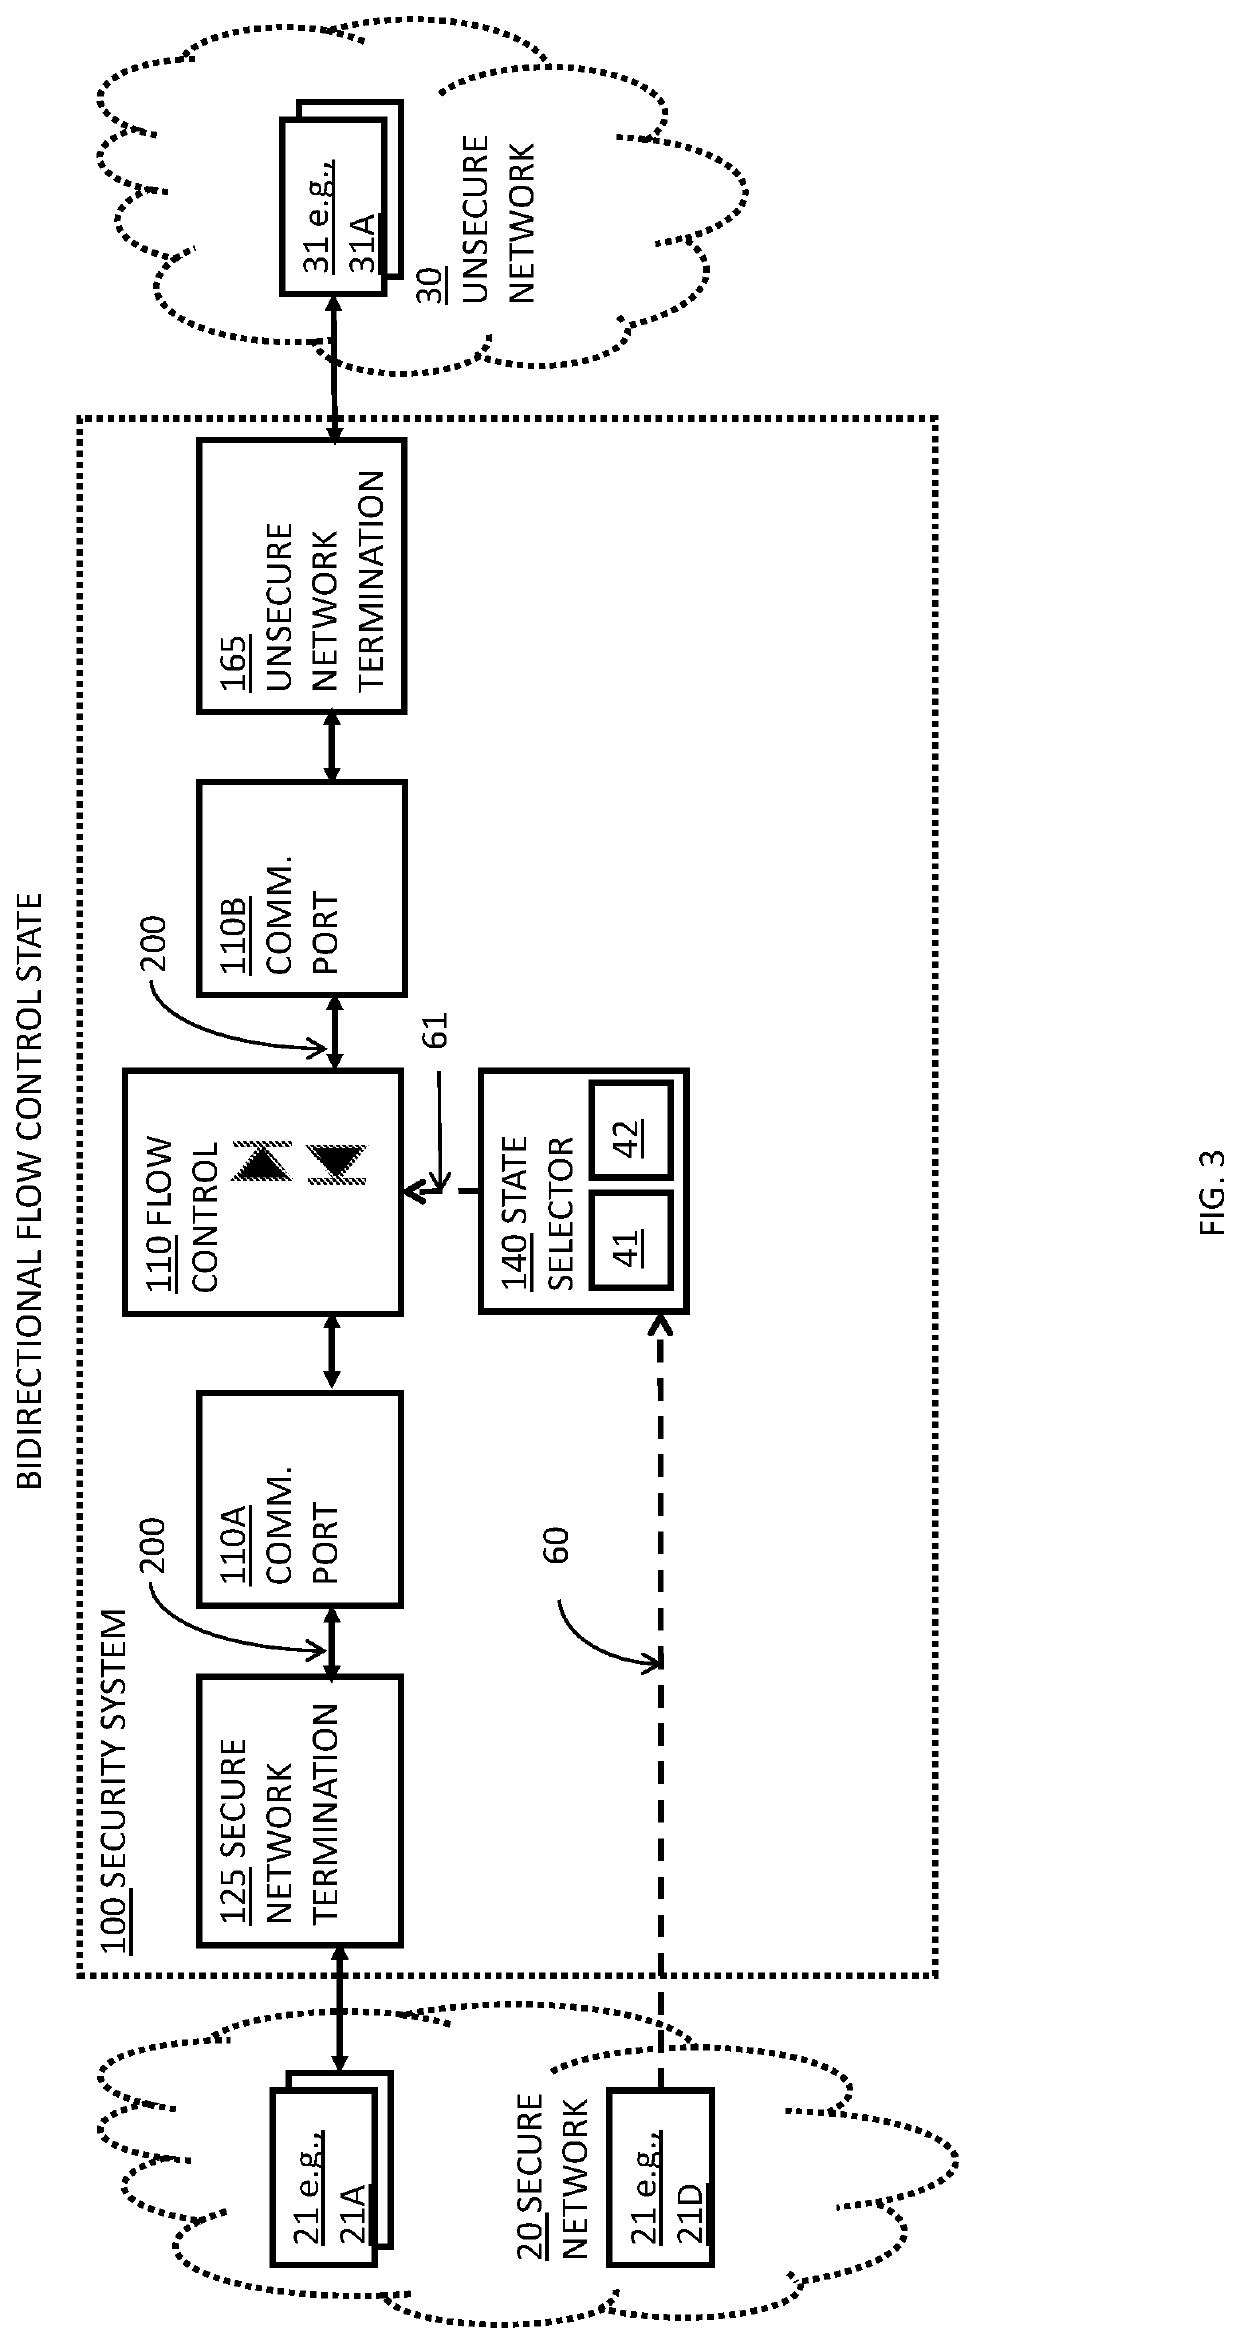 System and method for isolating data flow between a secured network and an unsecured network